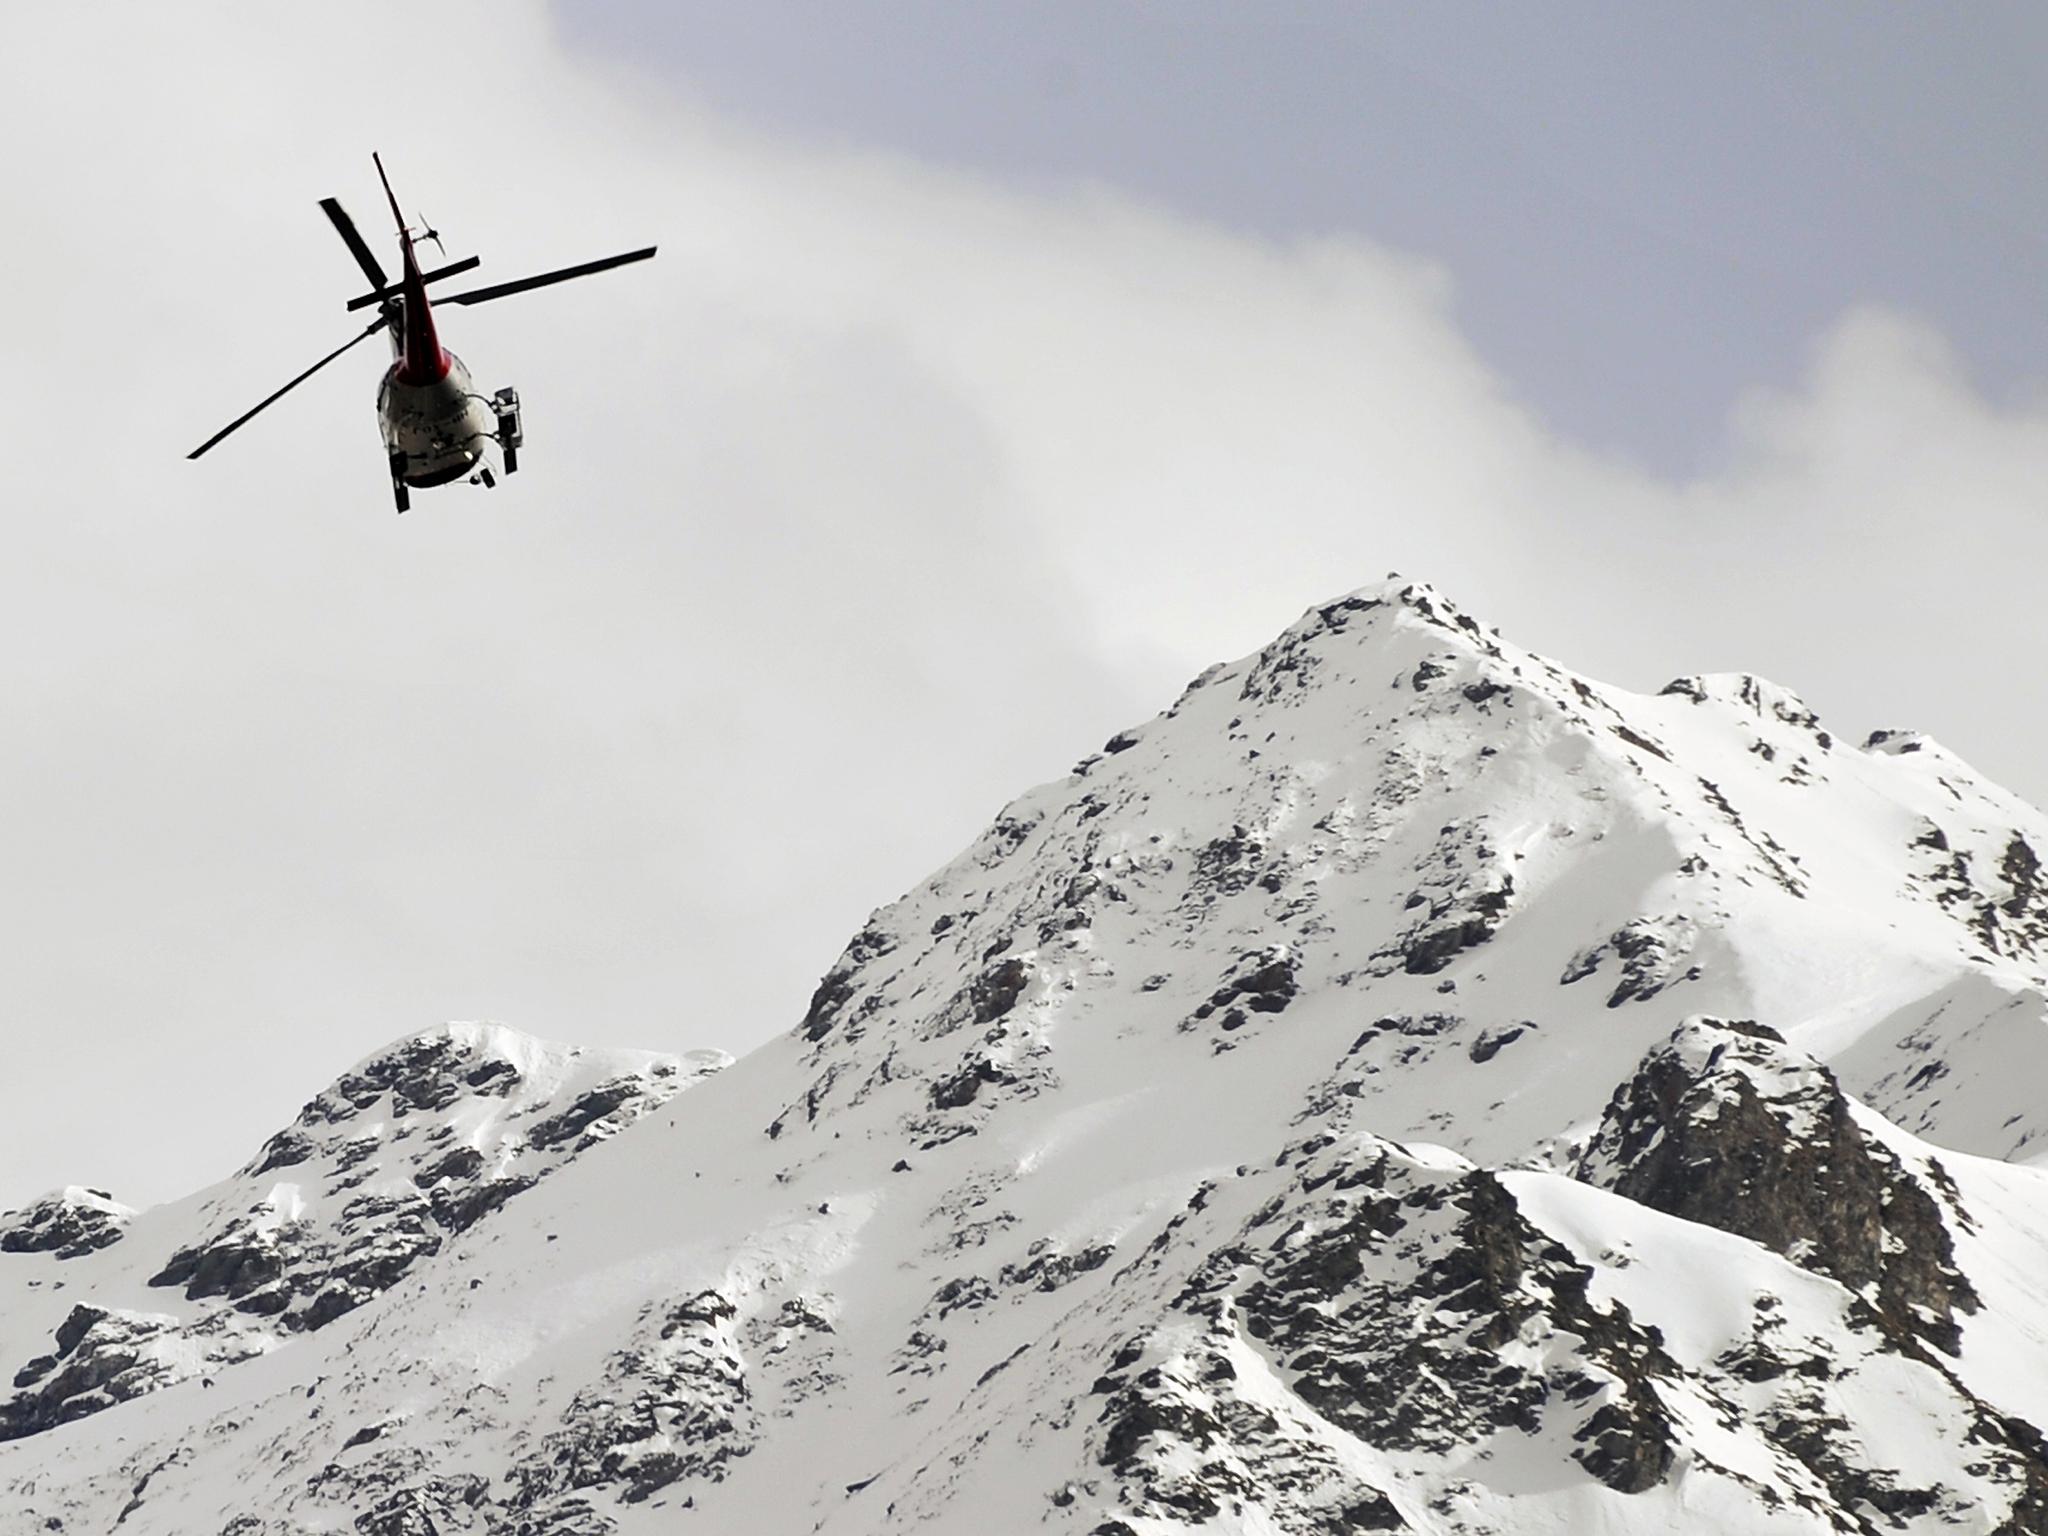 Four skiers were involved in the incident and all were recovered by helicopter